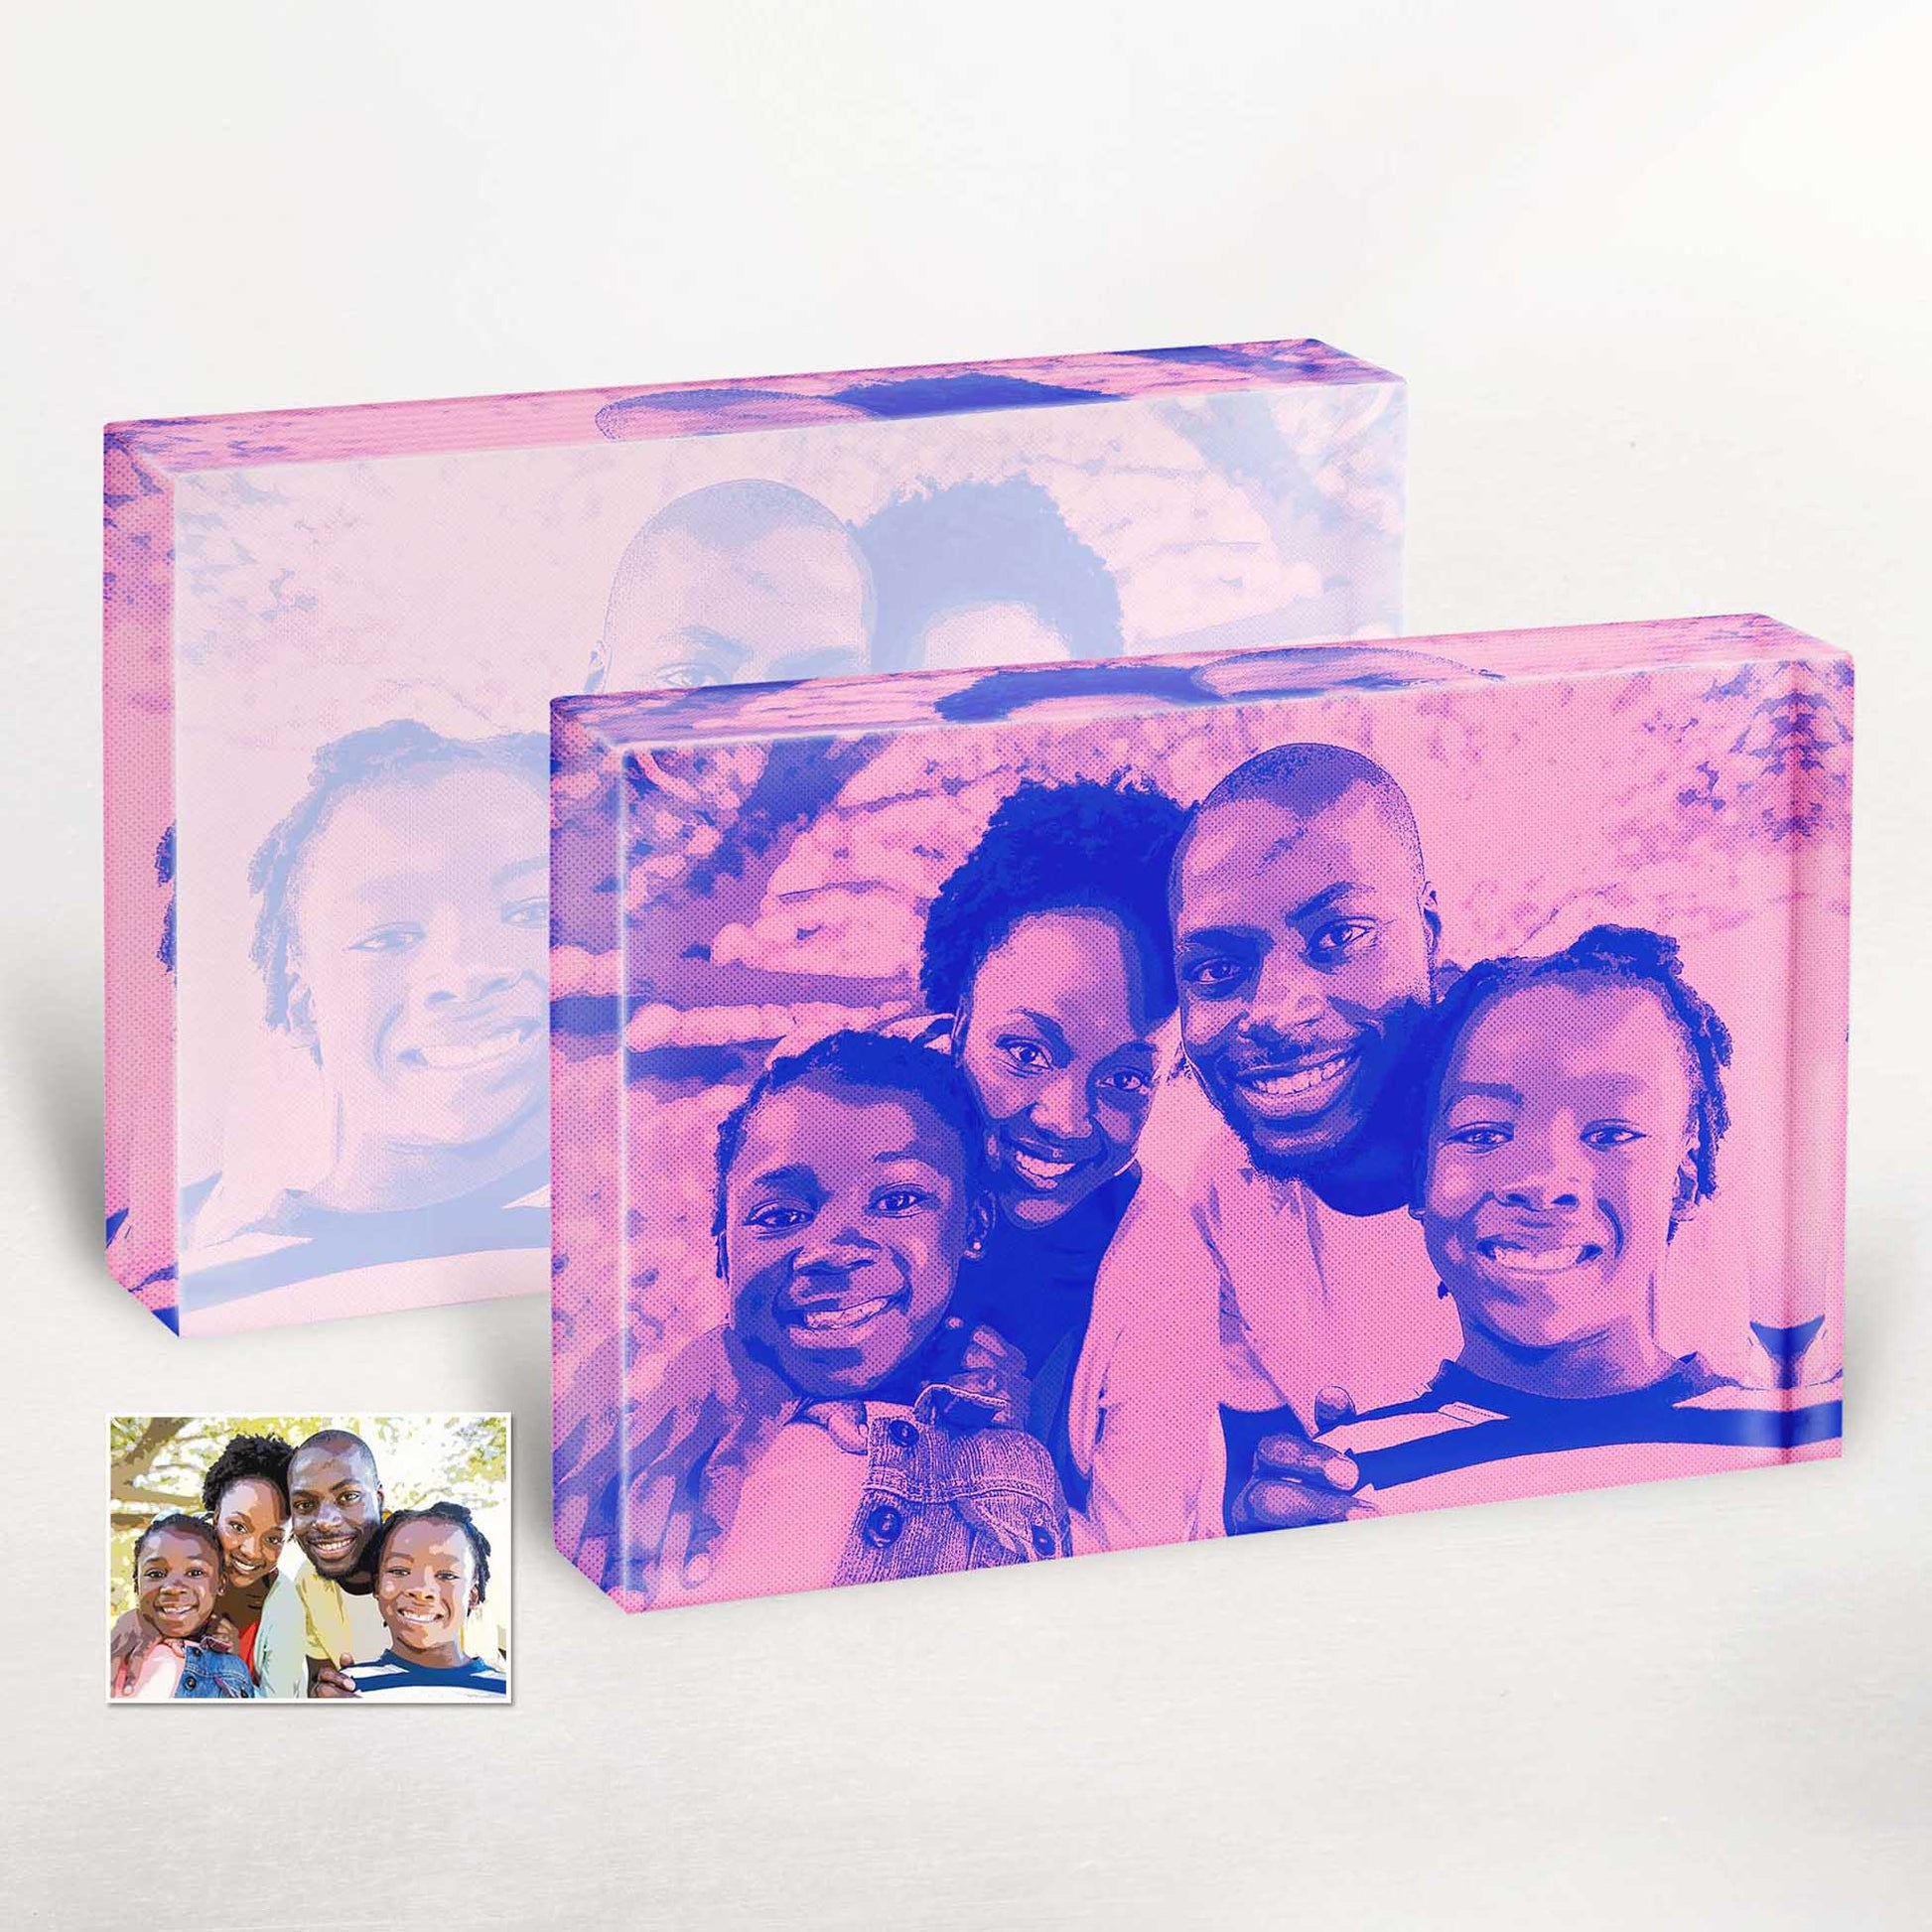 Add a pop of color and excitement with our Personalised Purple and Pink Comic Acrylic Block Photo. Its vibrant comic cartoon style brings a hip and trendy vibe, making it a cool and unique gift choice for those who appreciate originality and creativity.